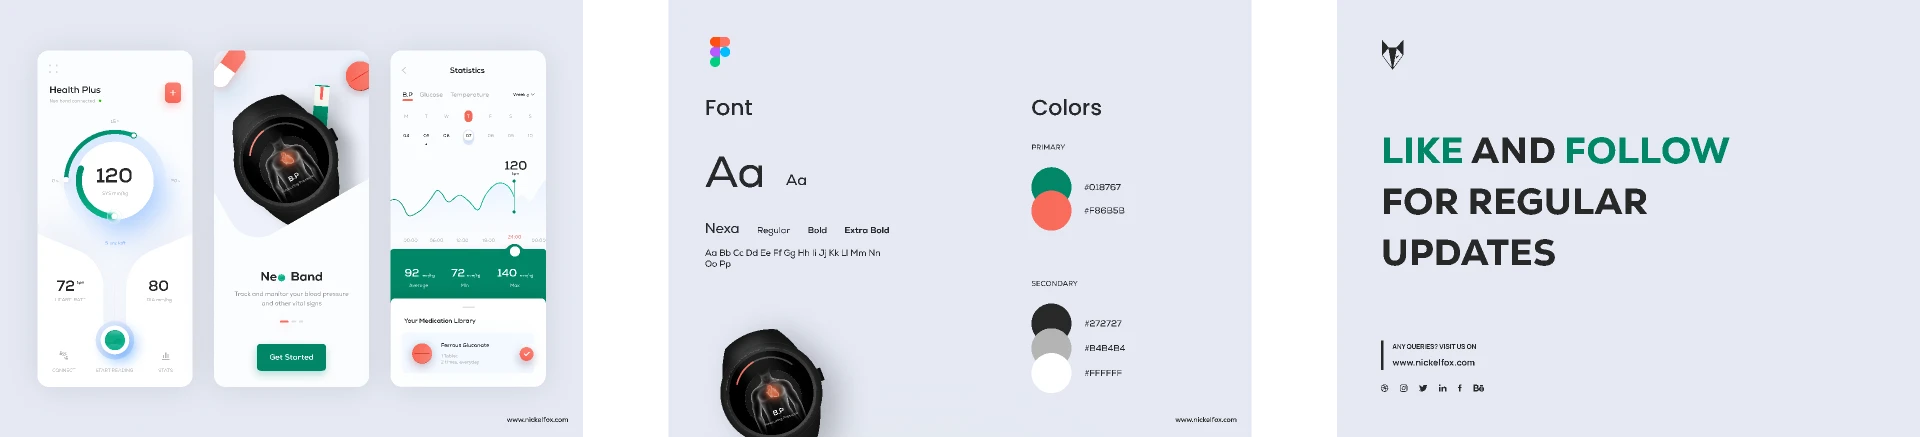 Fitness Band for Figma and Adobe XD